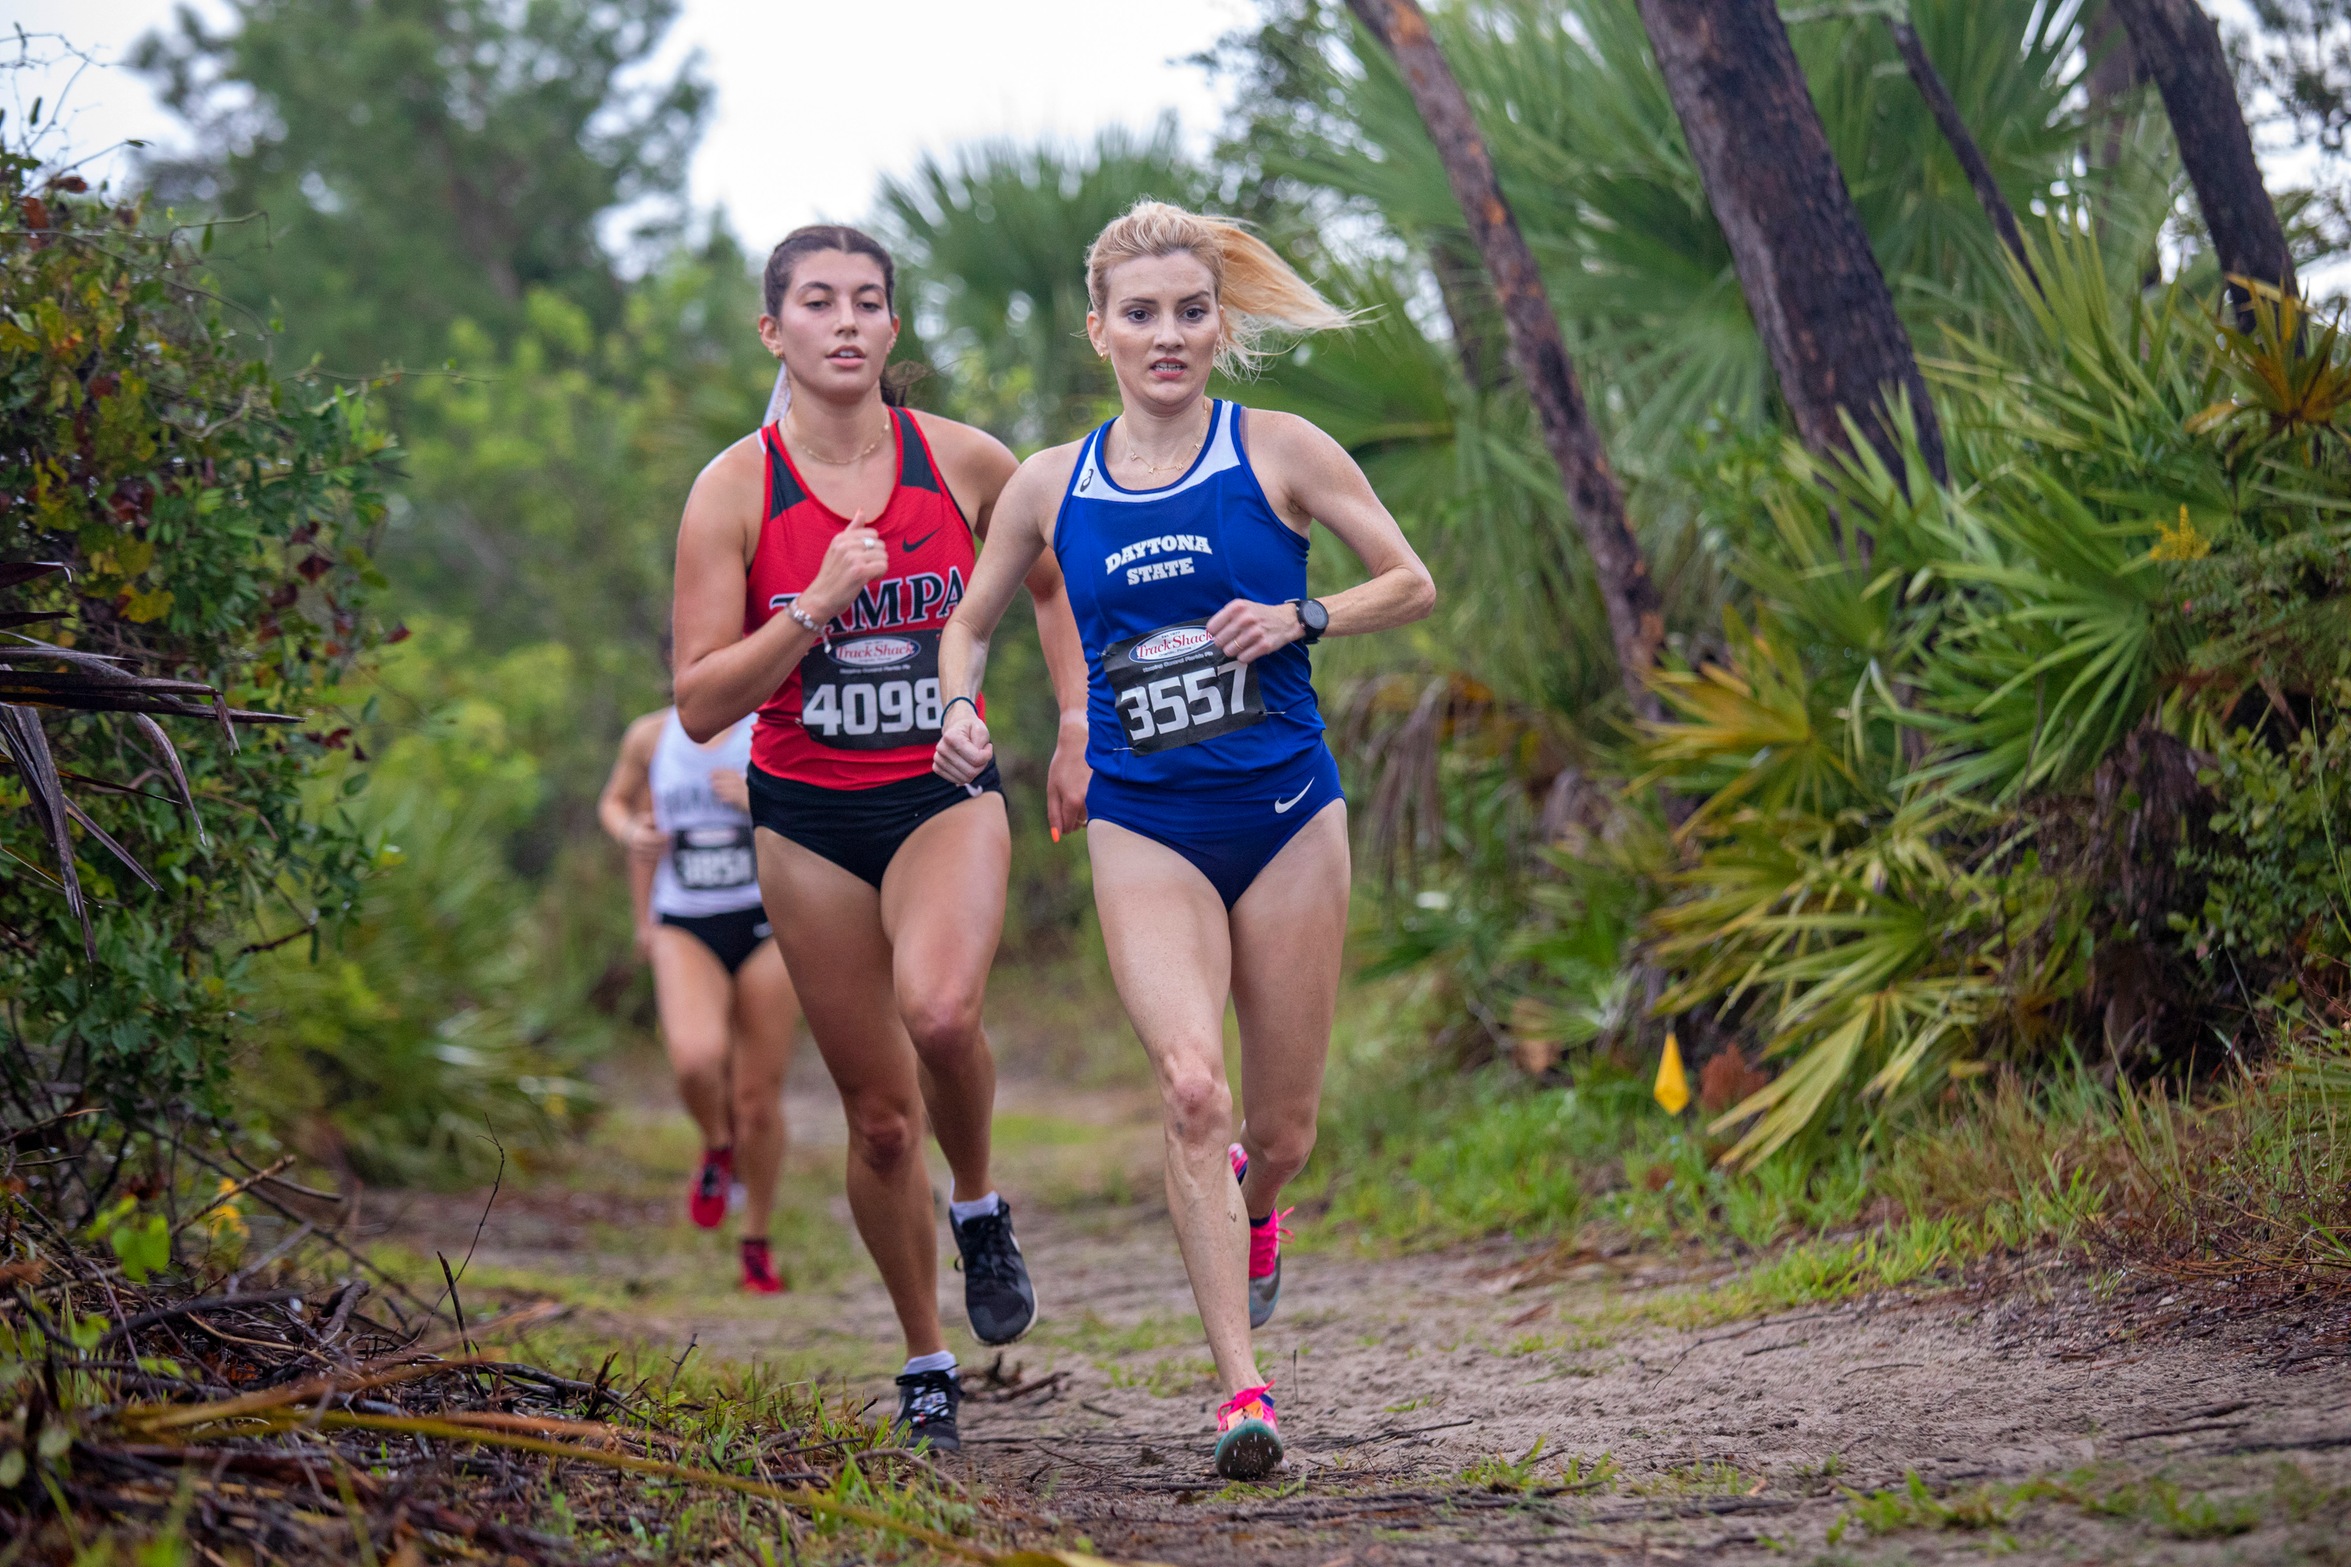 Shannon Jones at Embry Riddle Invitational